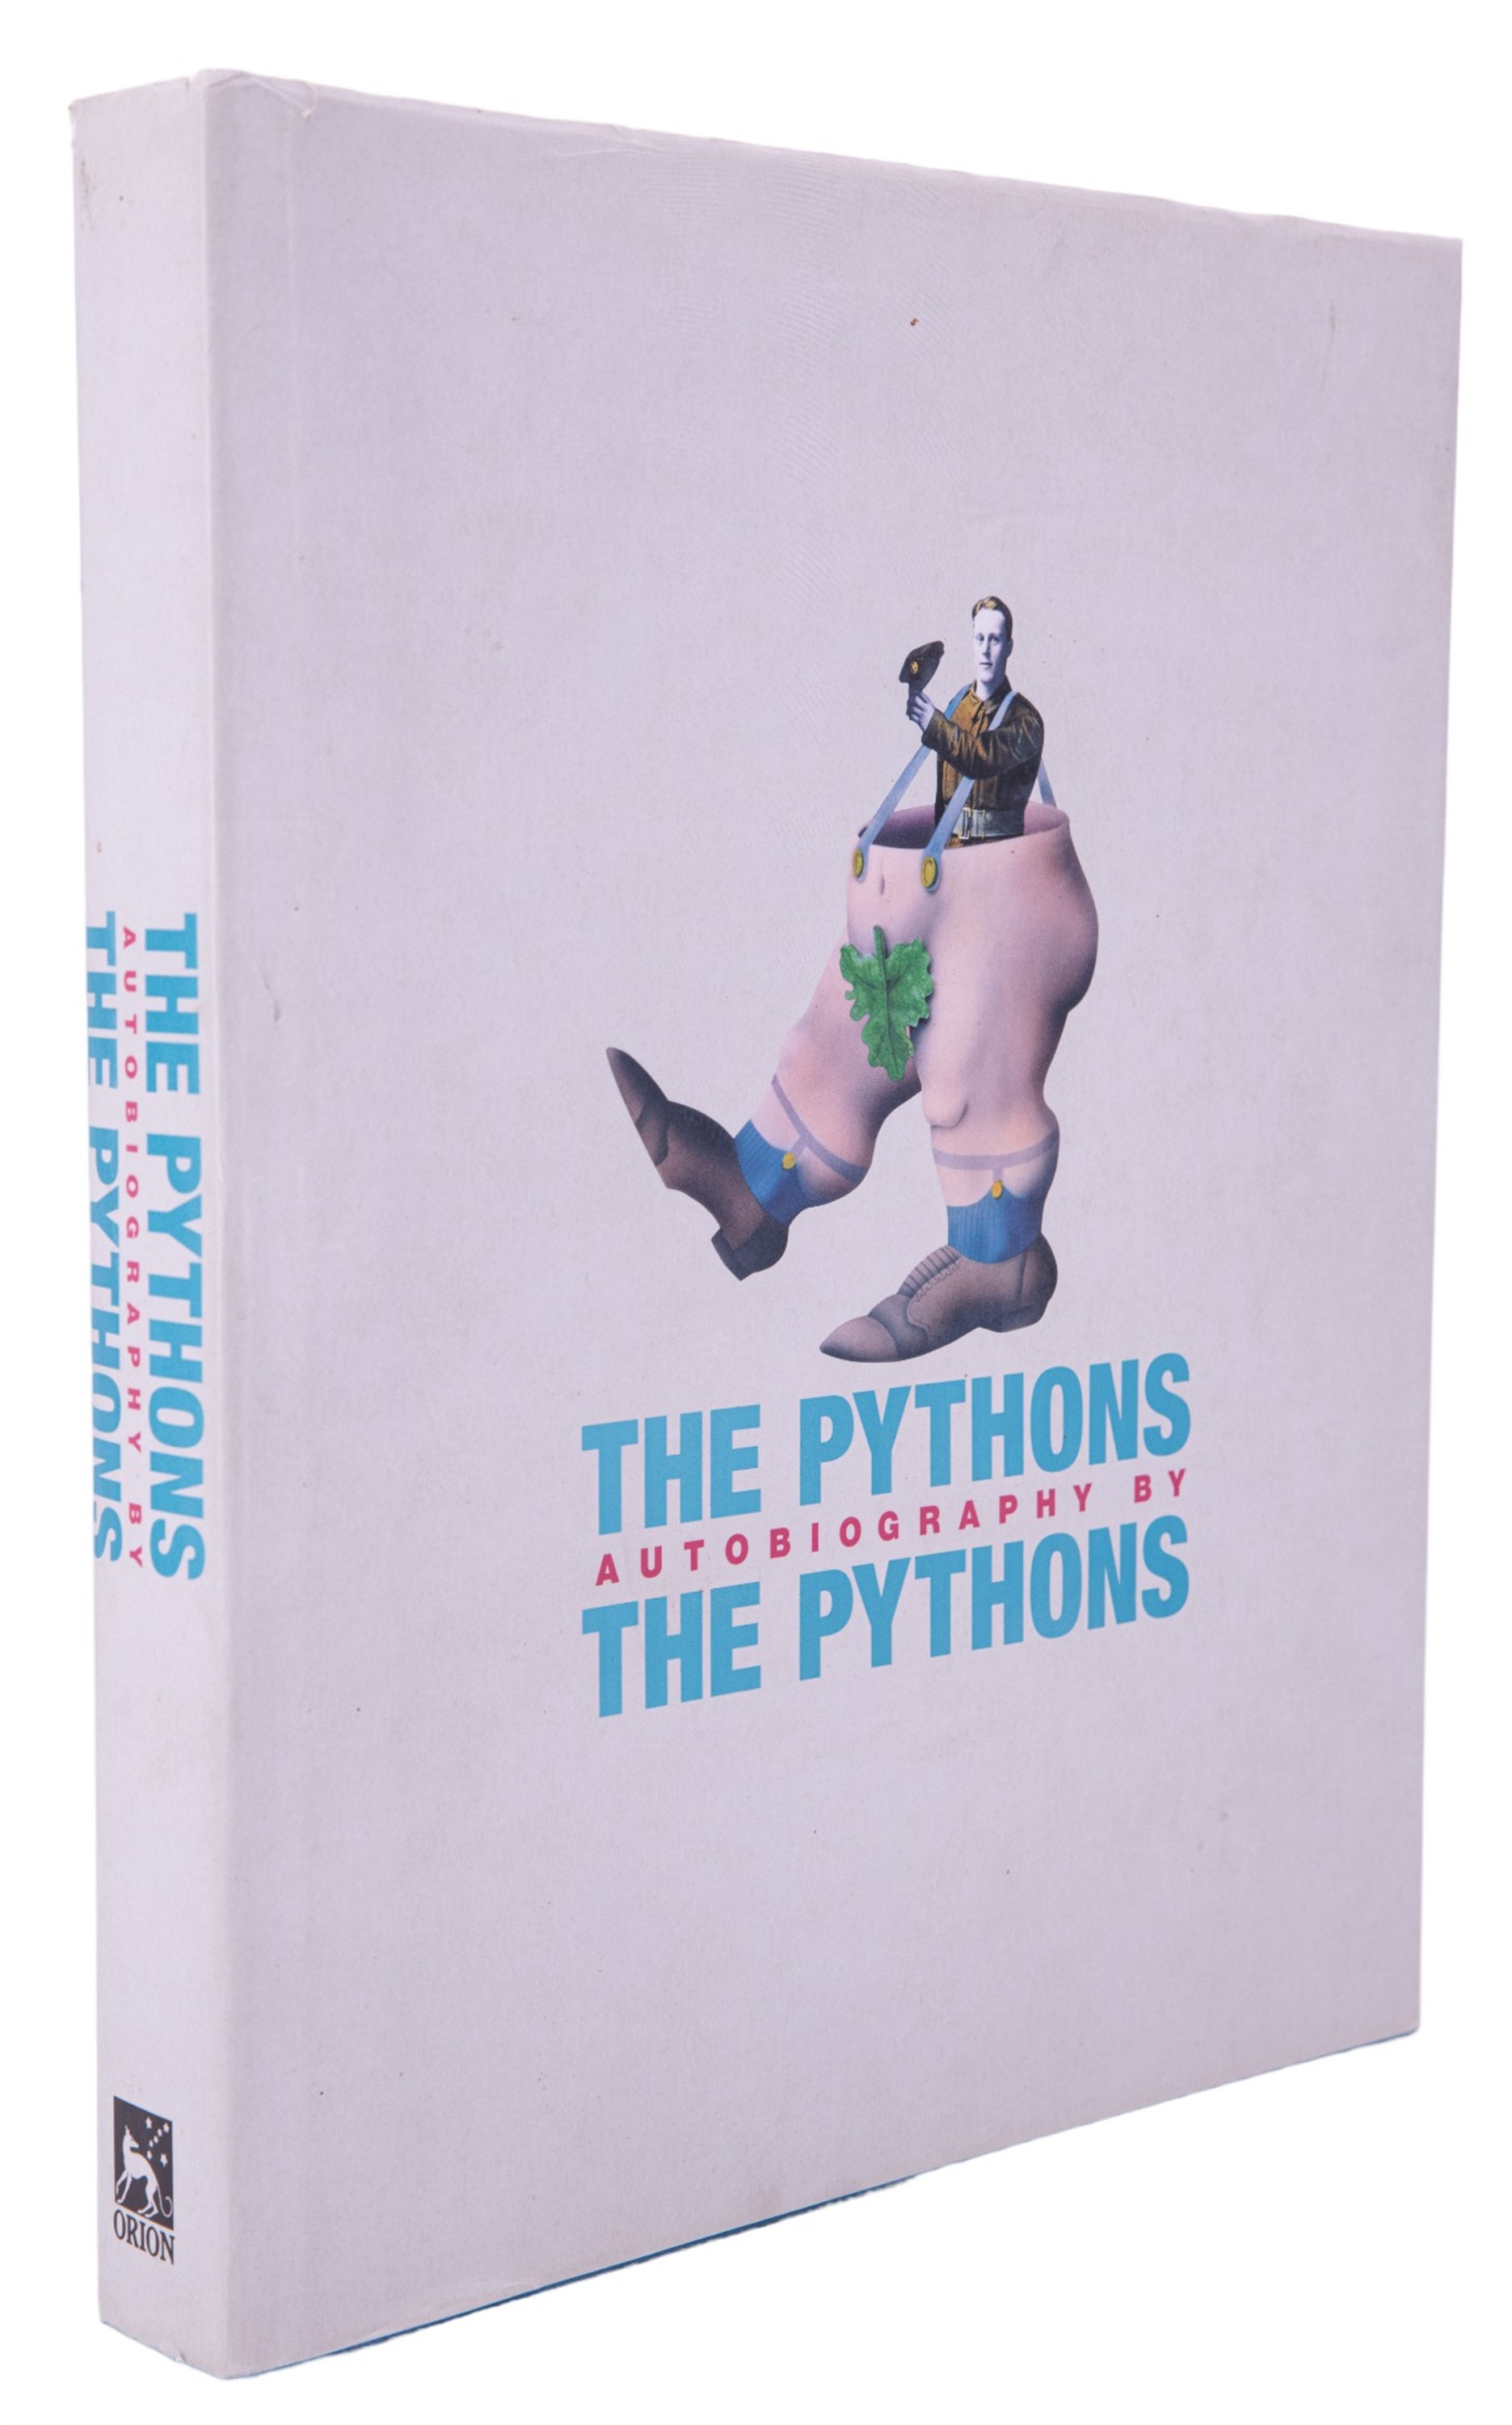 Monty Python, "The Pythons. Autobiography by The Pythons", London, Orion Books, 2003